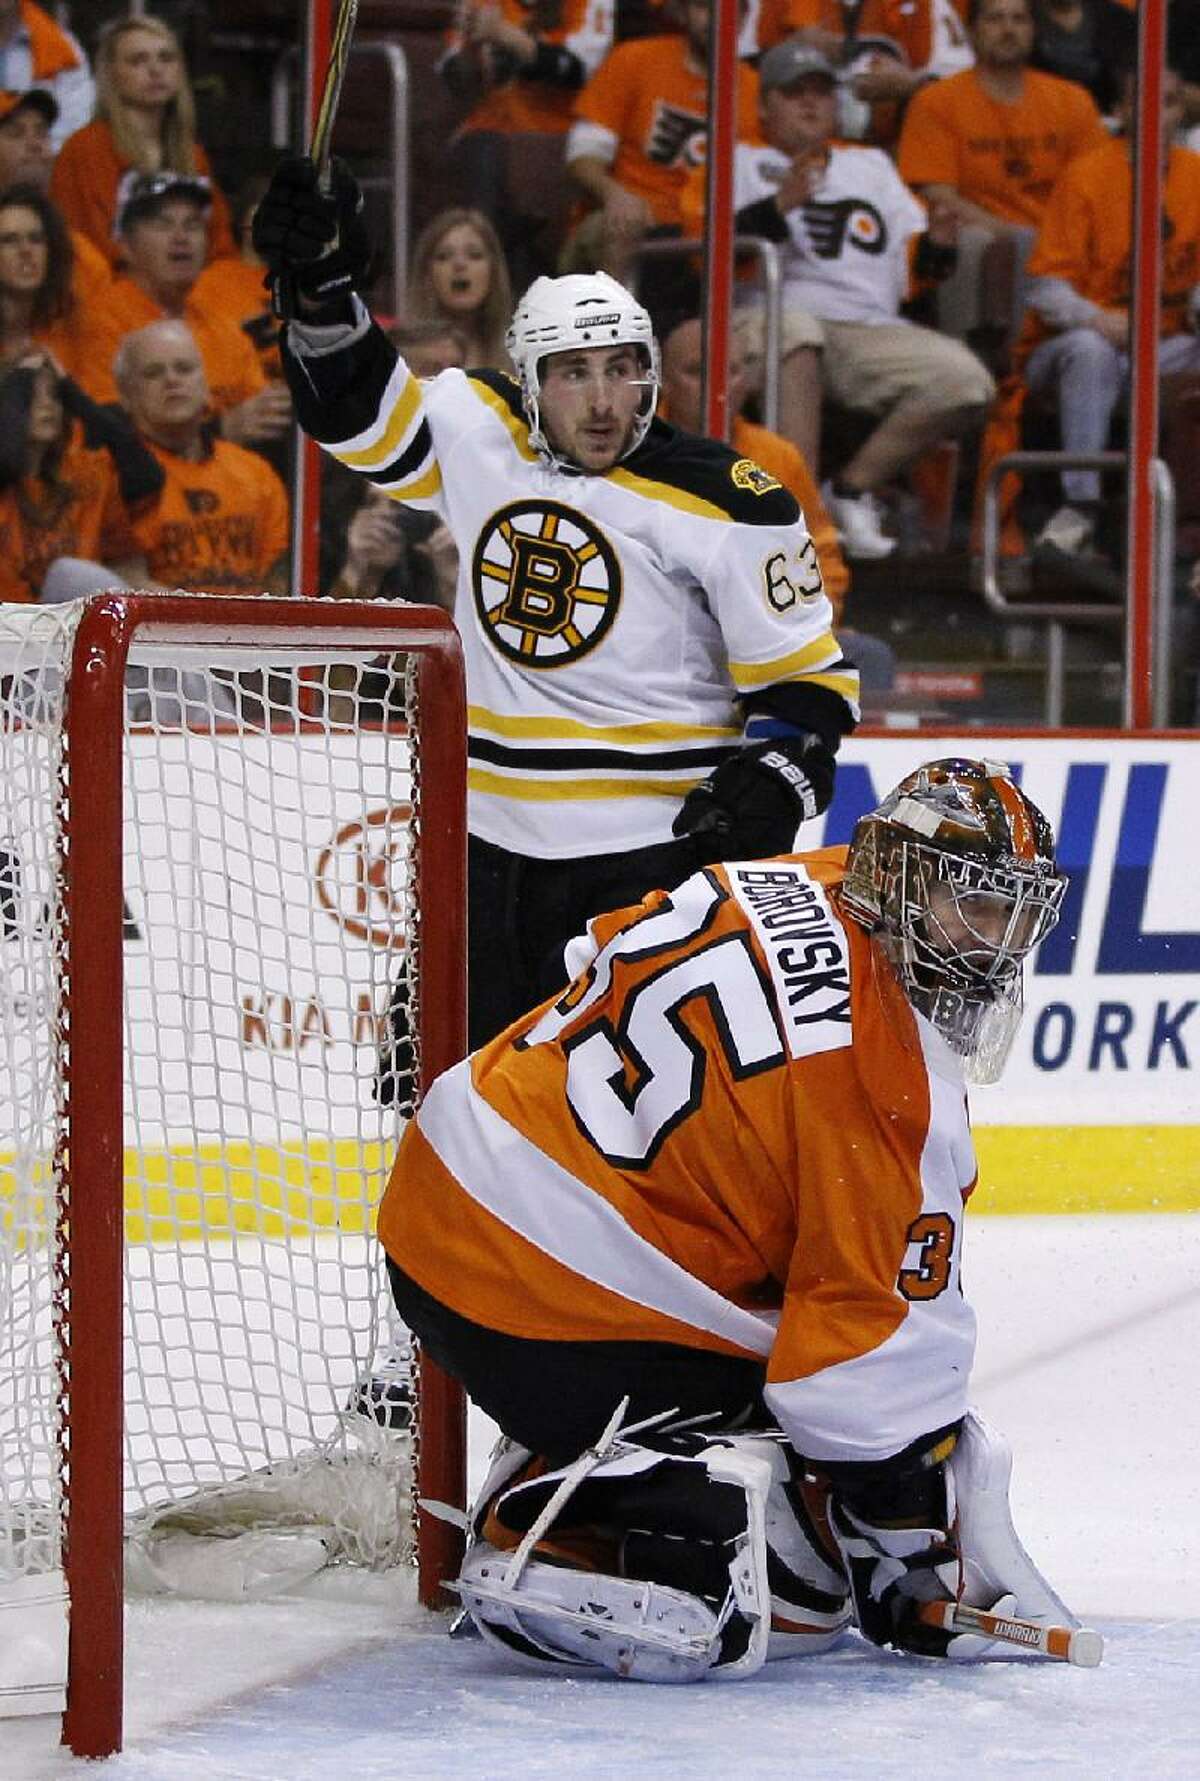 ASSOCIATED PRESS Boston's Brad Marchand (63) reacts after scoring a goal against Philadelphia's (35) during the third period in Game 1 of the Eastern Conference semifinal Stanley Cup playoffs series in Philadelphia. Boston won 7-3.